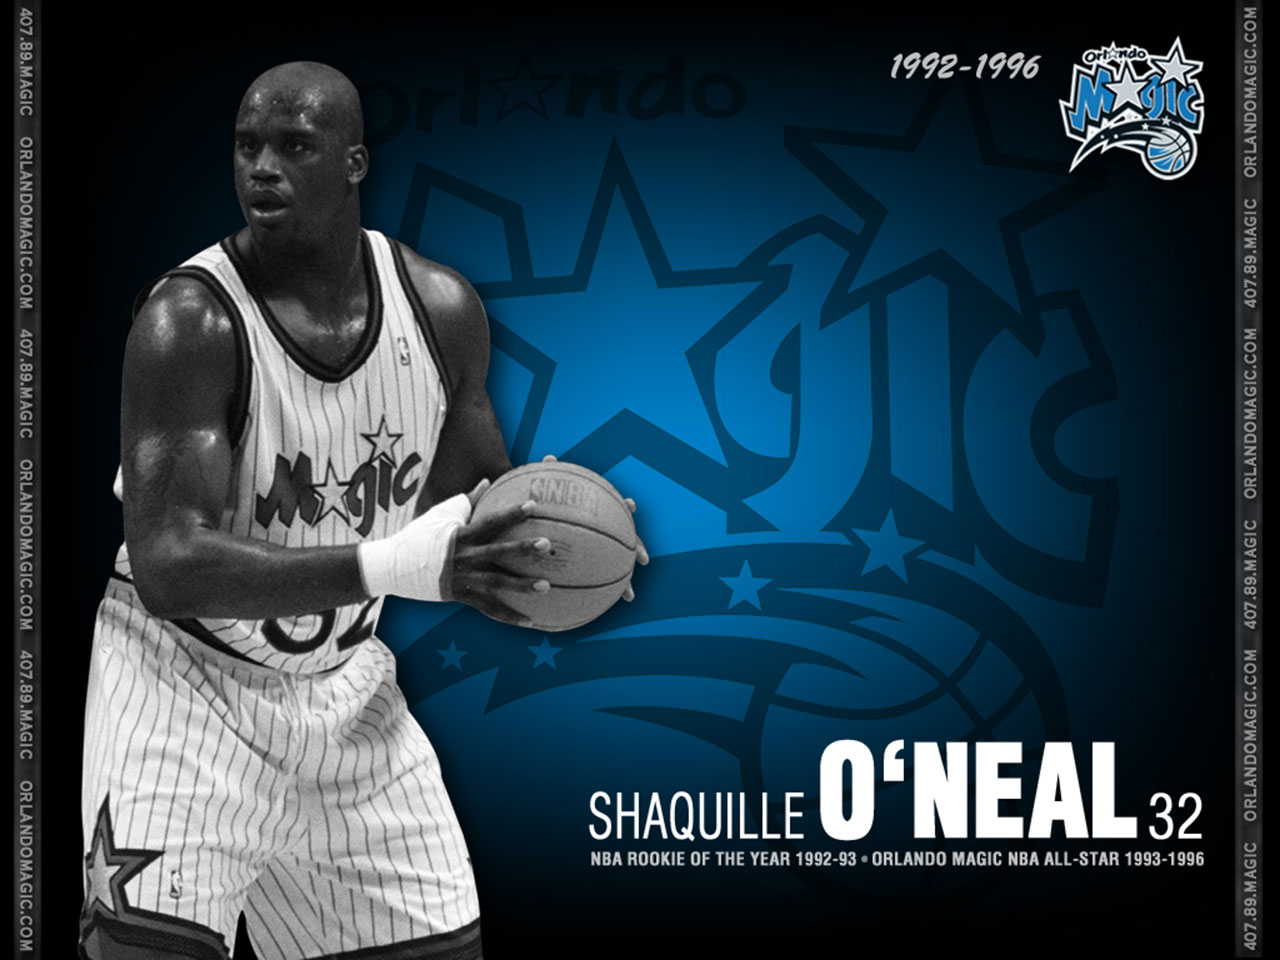 Shaquille O Neal Professional Basketball Player Legend